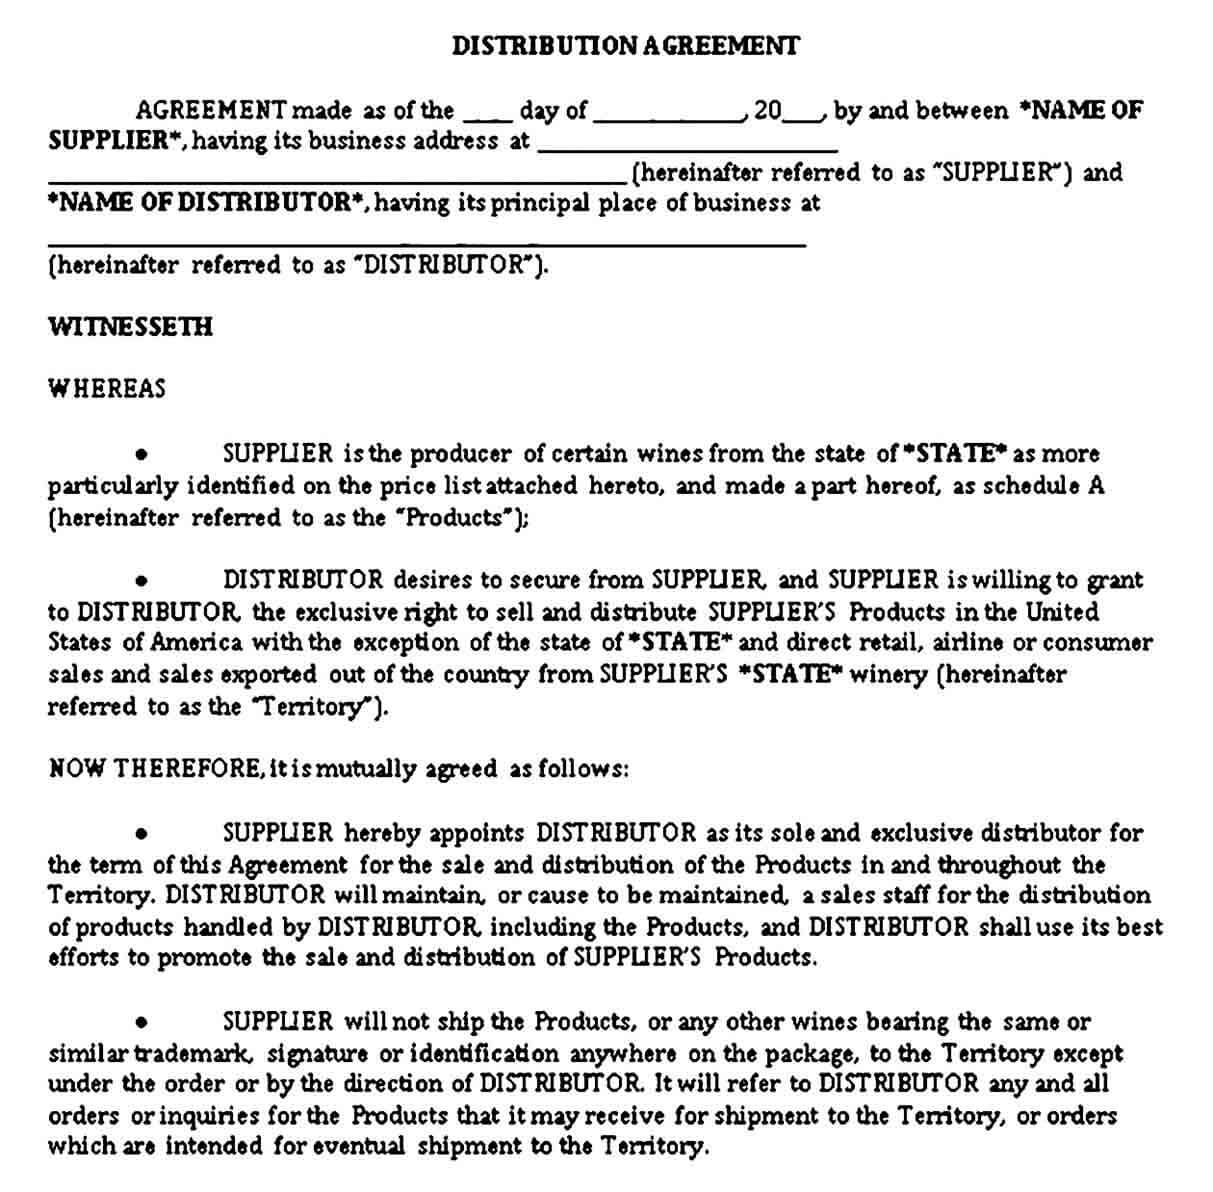 Document Distribution Agreement Form Example